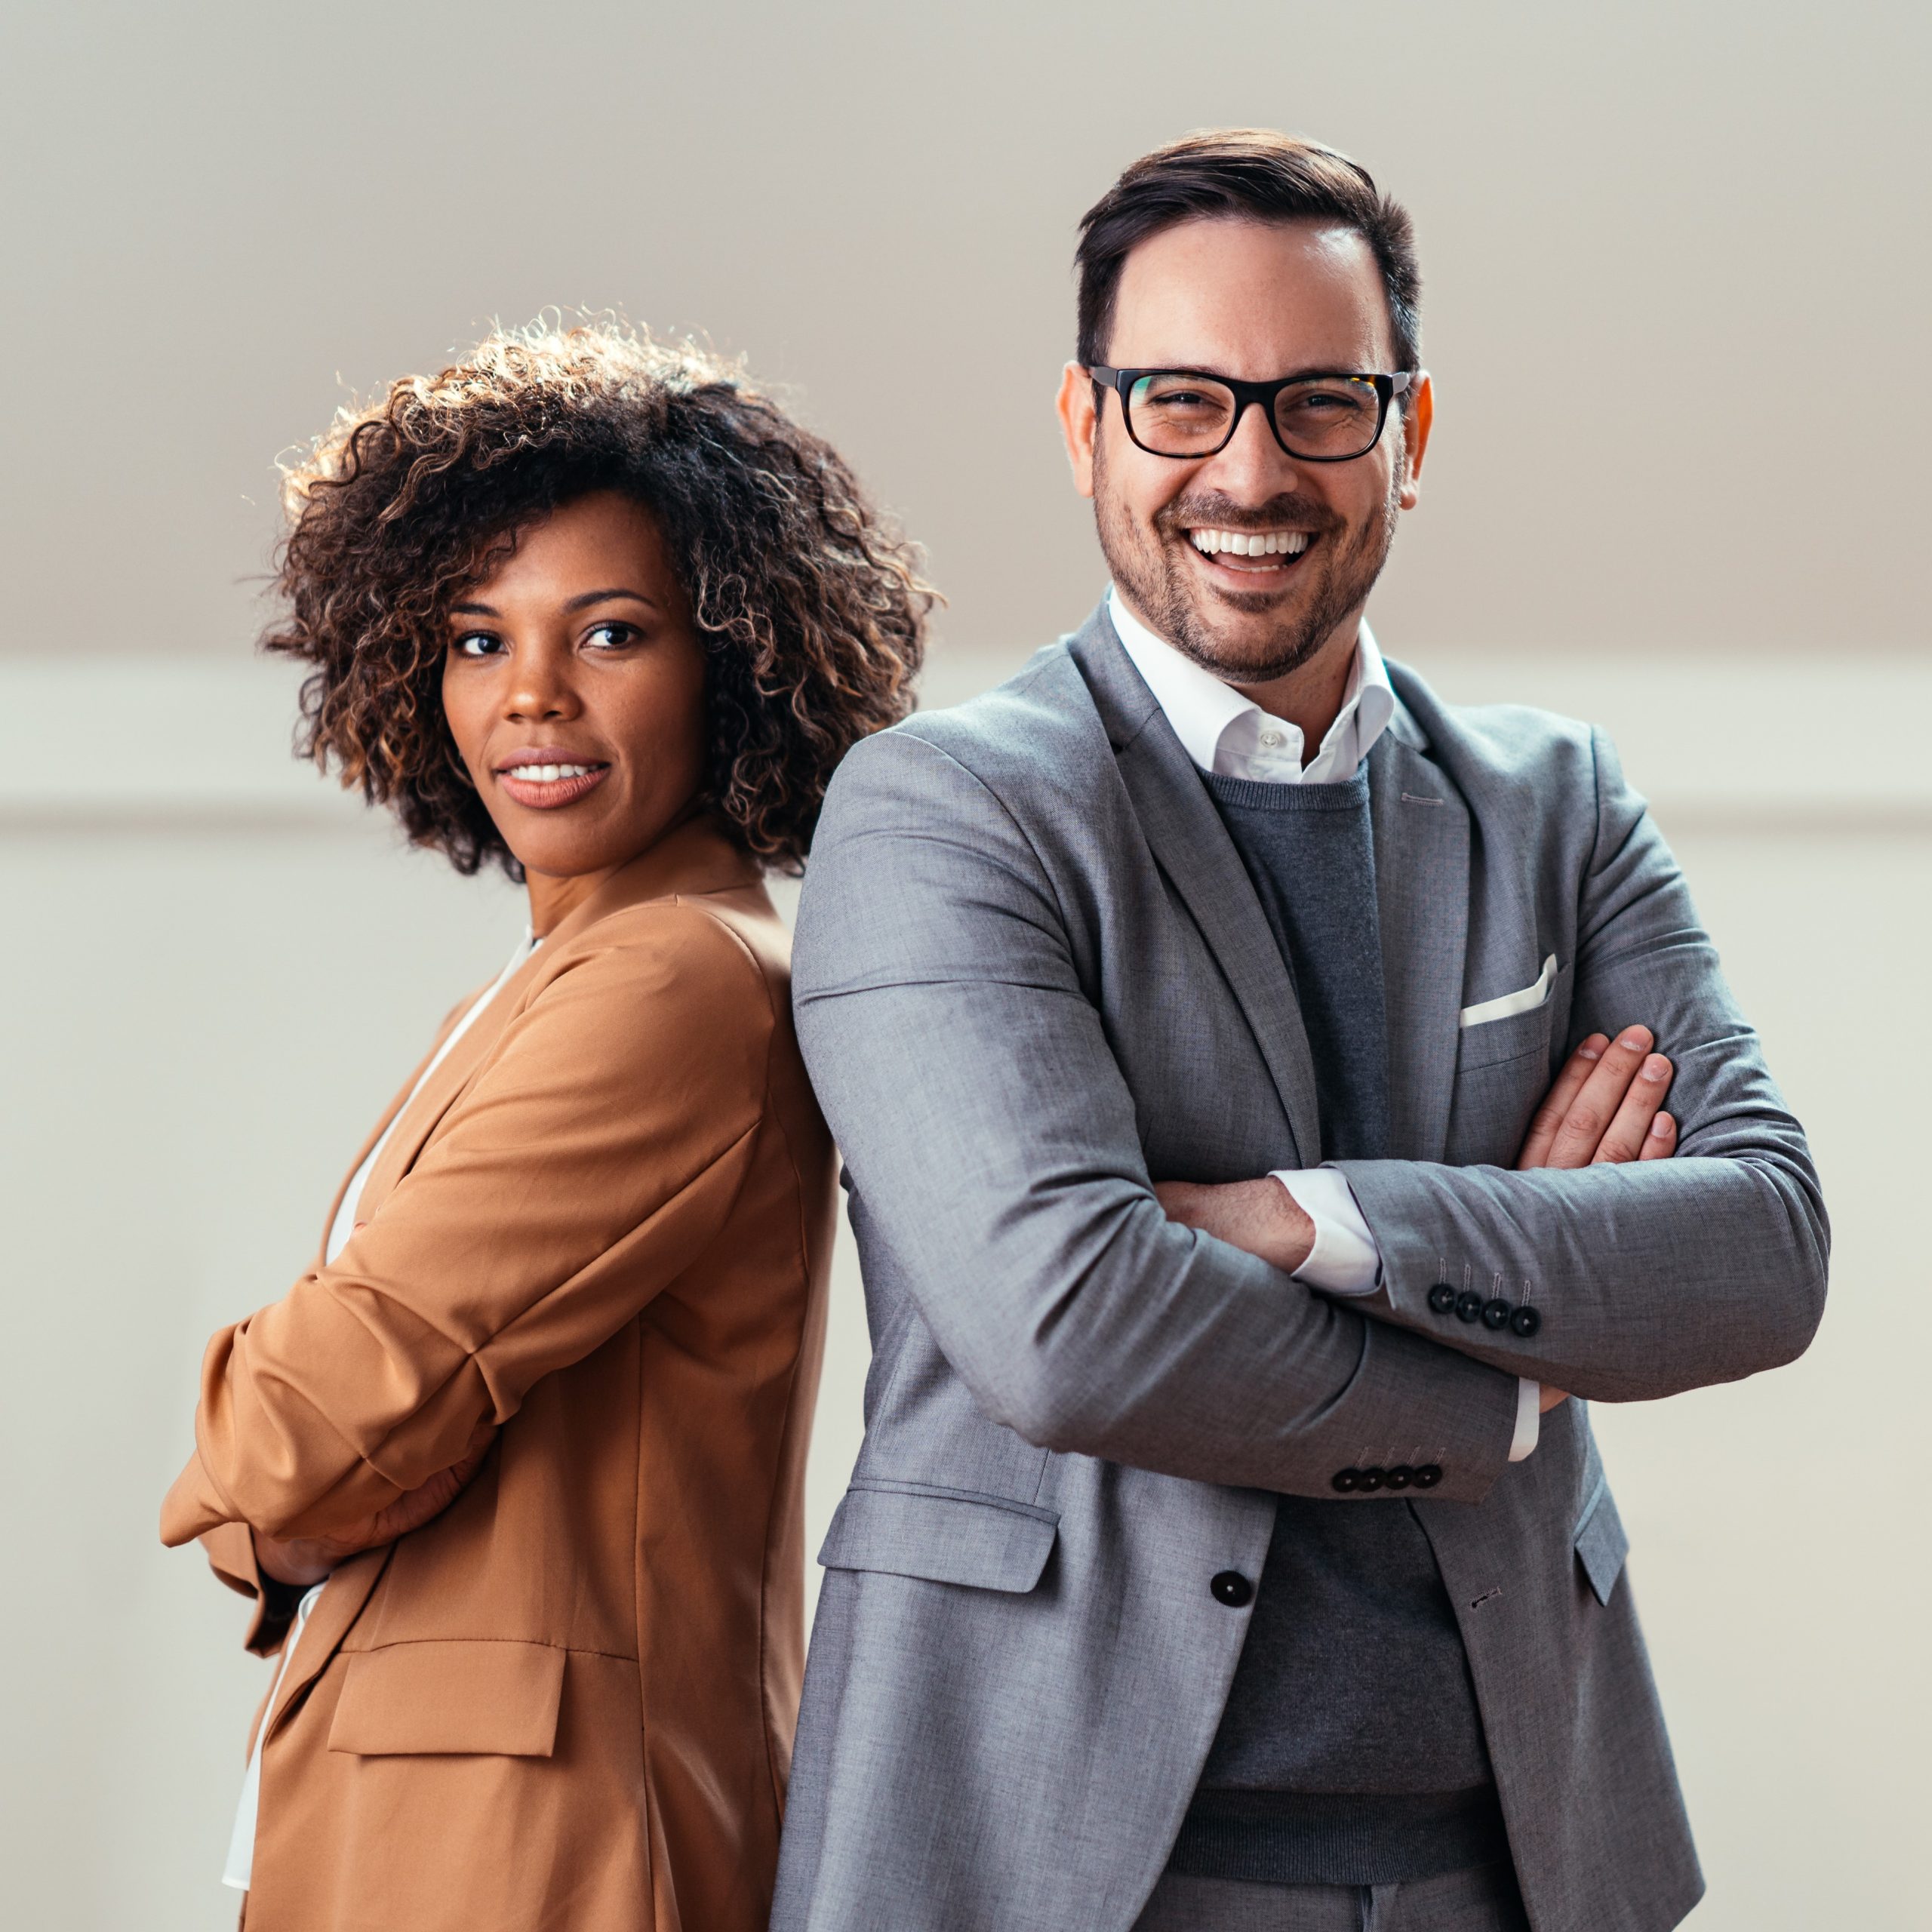 Portrait of cheerful multi ethnic business couple wearing suit and looking at camera with lot of copy space on right side